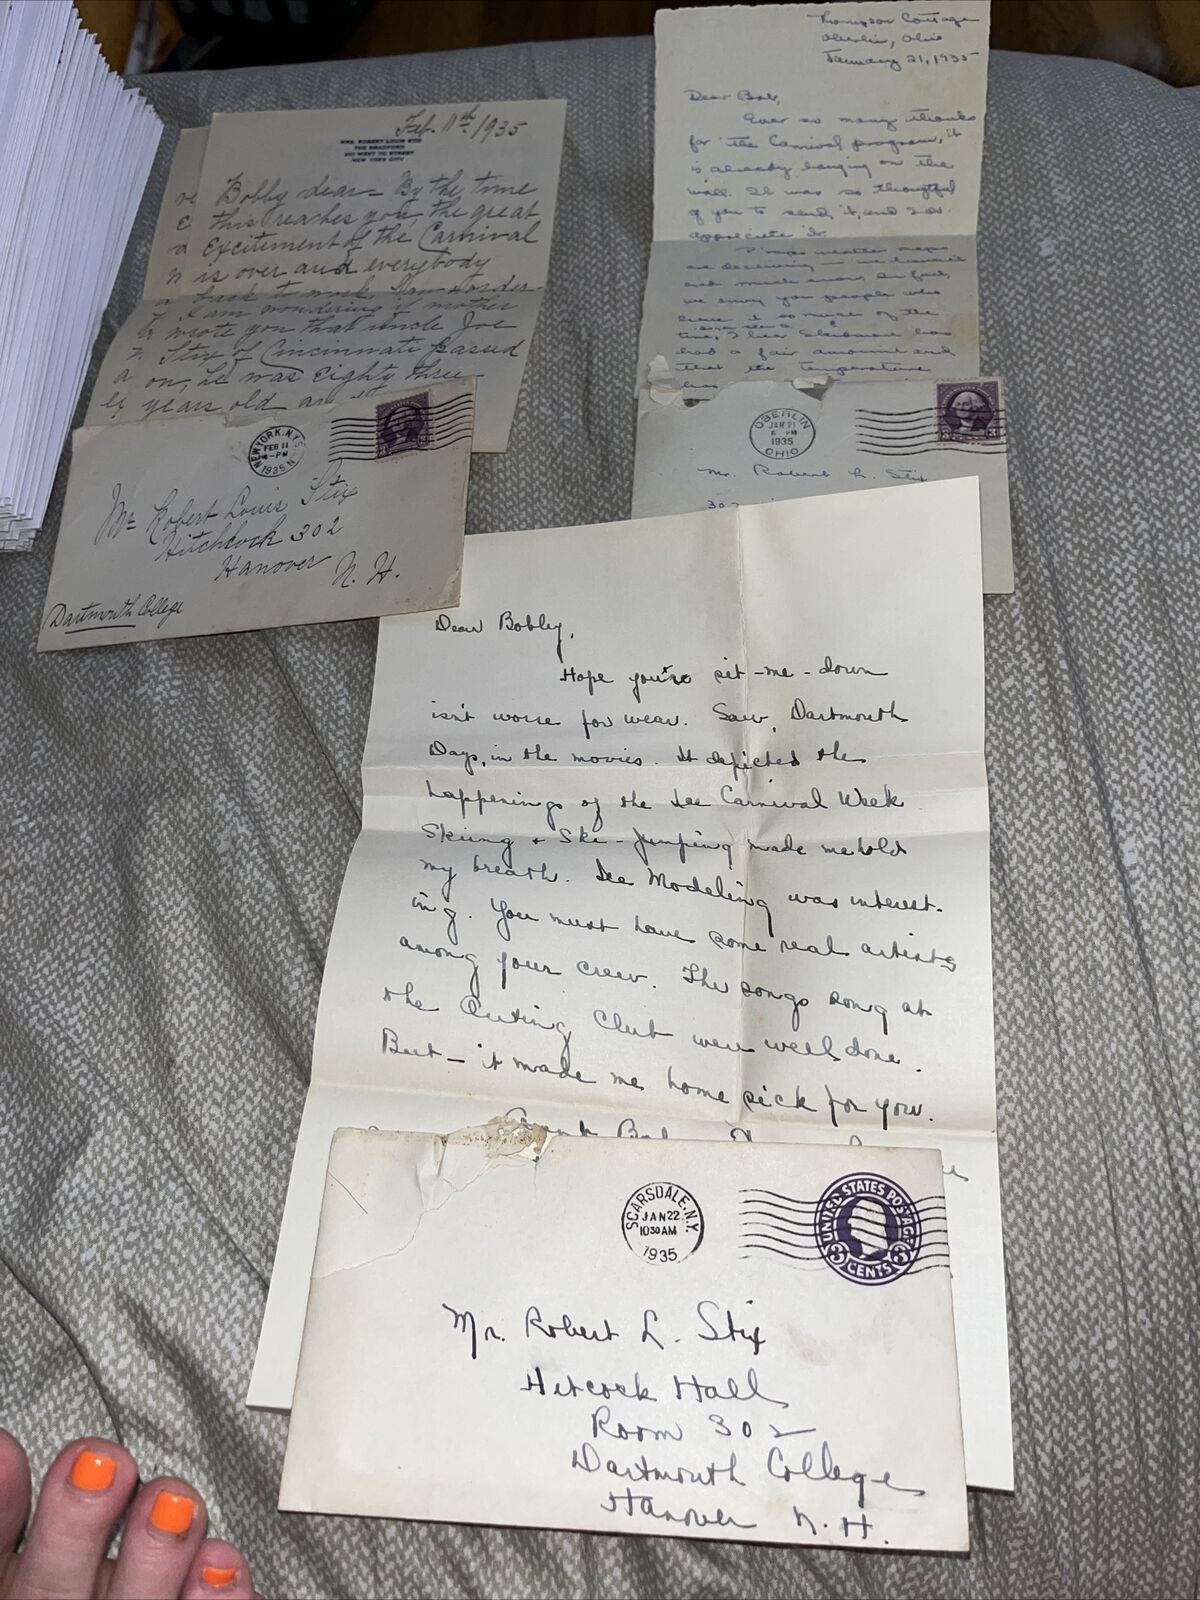 4 Antique 1935 Letters to Dartmouth College Student Discussing Carnival Week